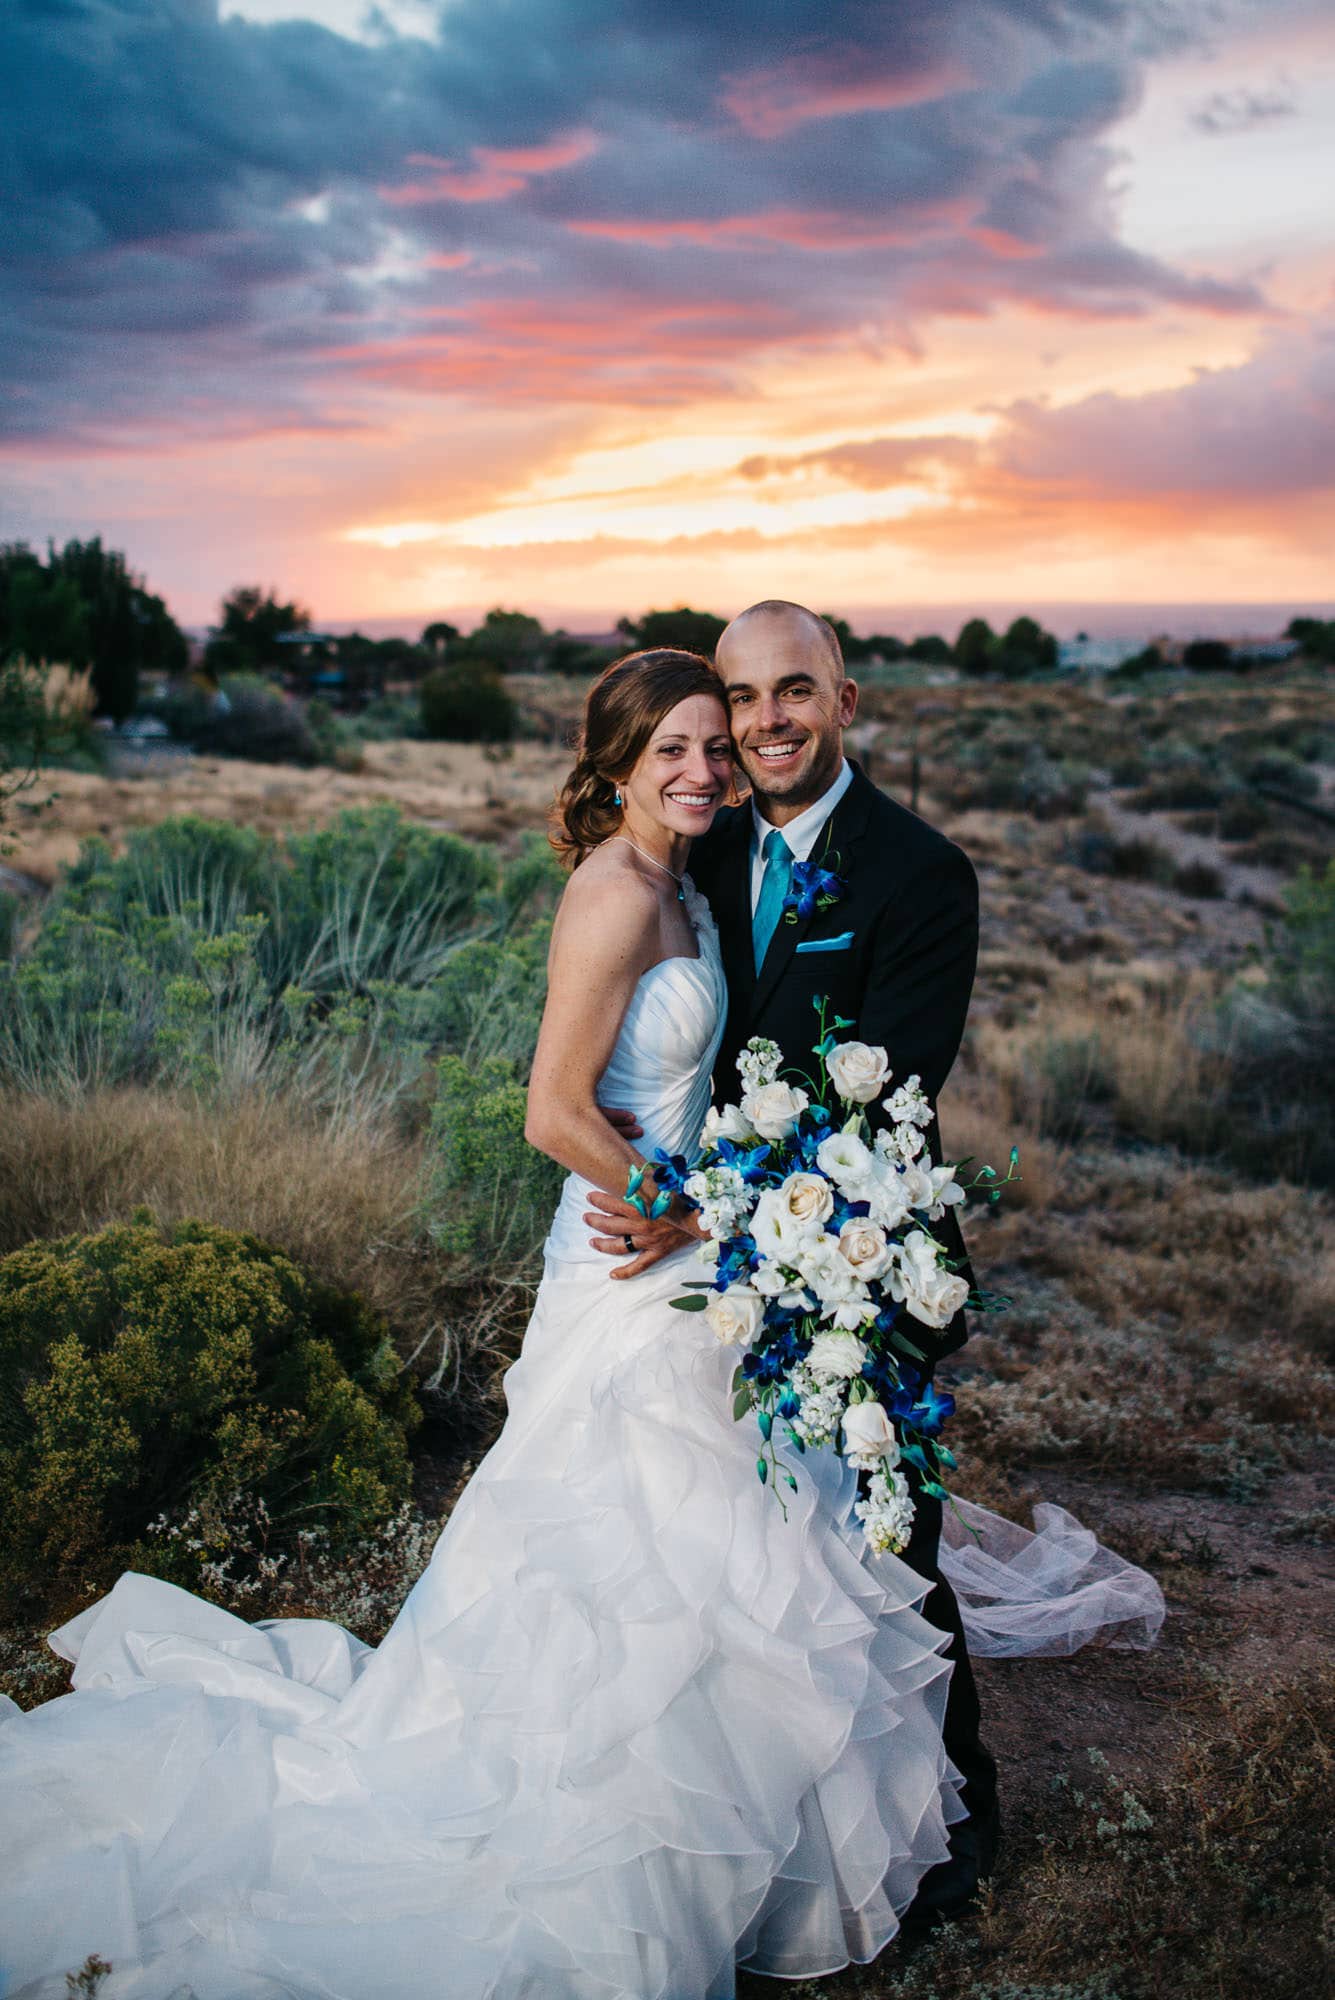 bride and groom smiling at camera during an epic sunset